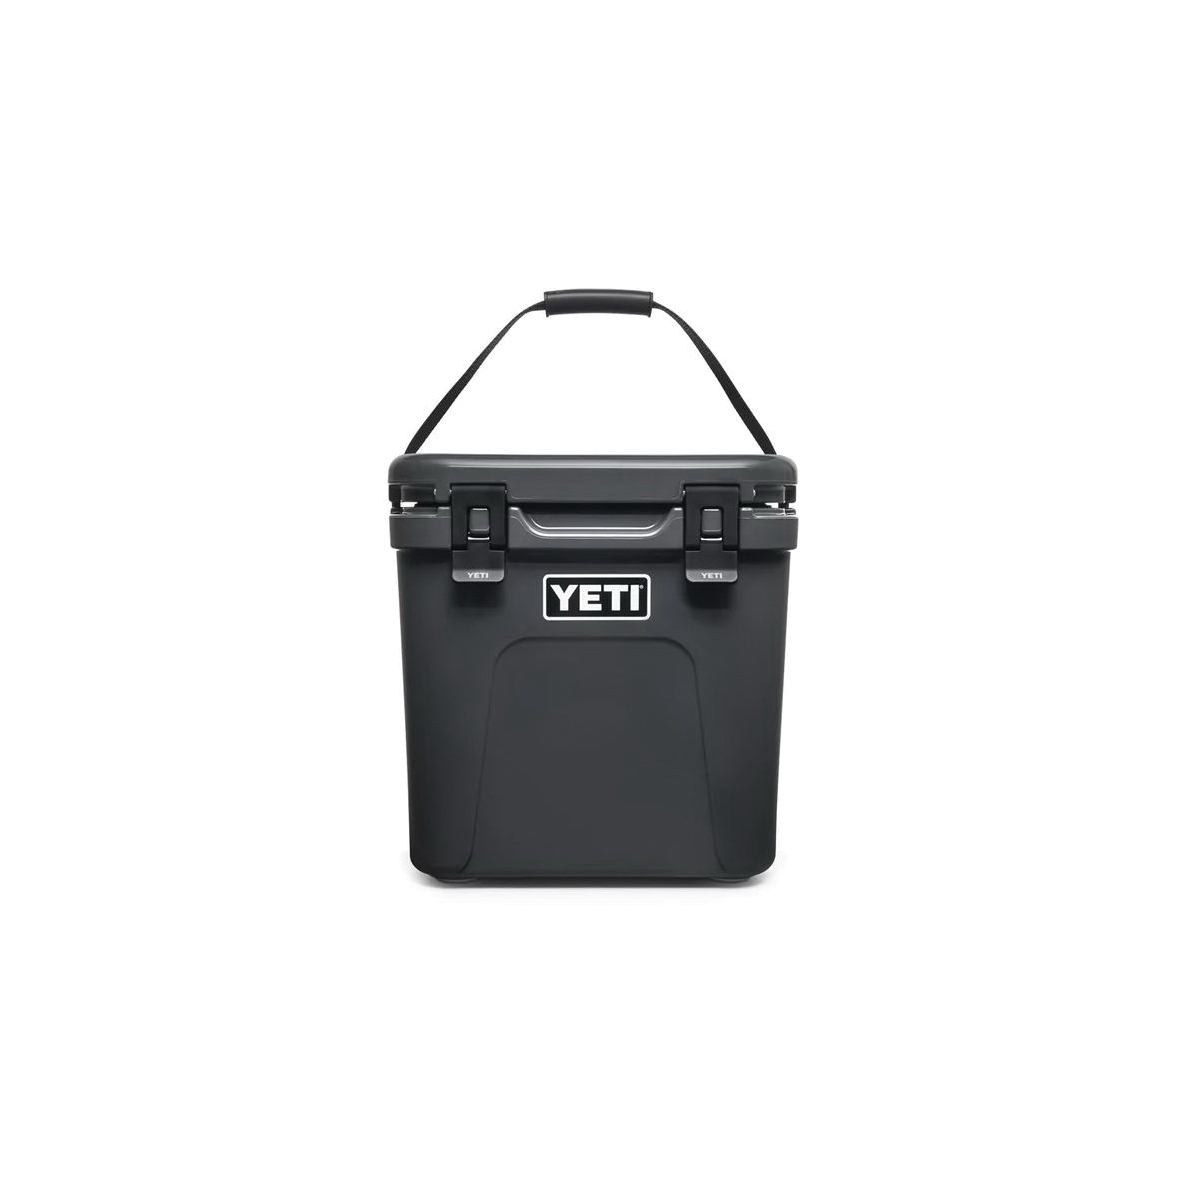 YETI Roadie 24 10022160000 Hard Cooler, 18 Can Cooler, Charcoal - 2